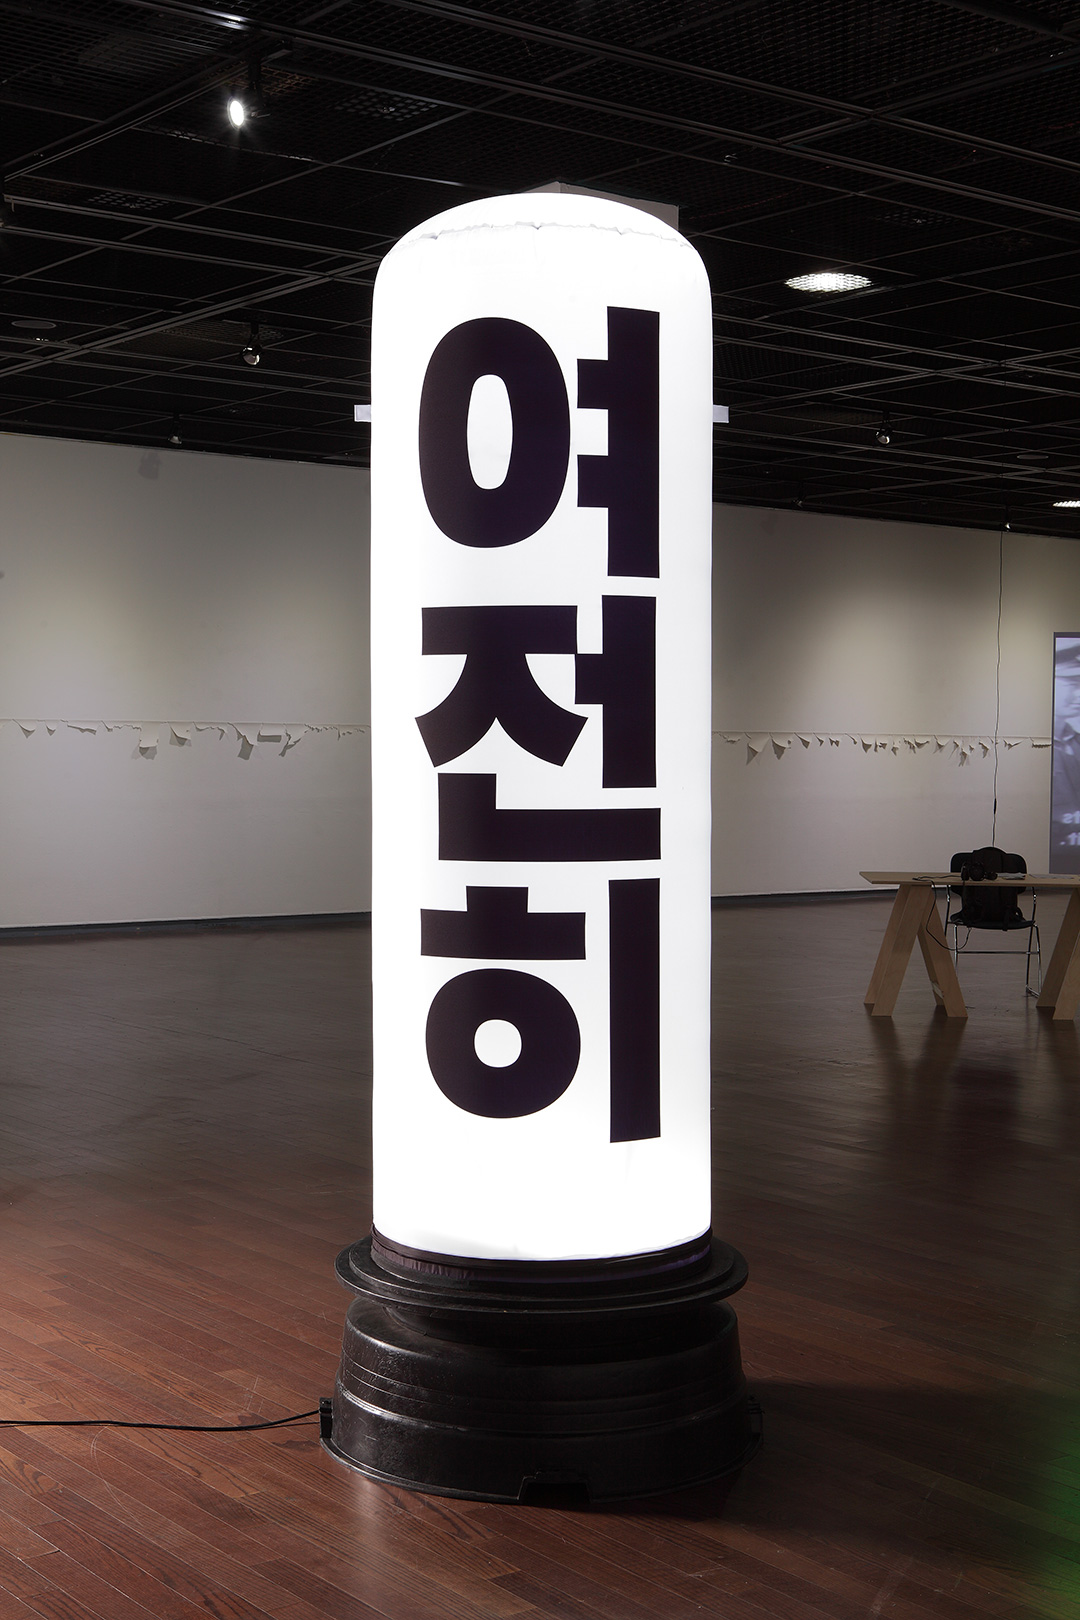 Photo courtesy of Gimhae Arts and Sports Center